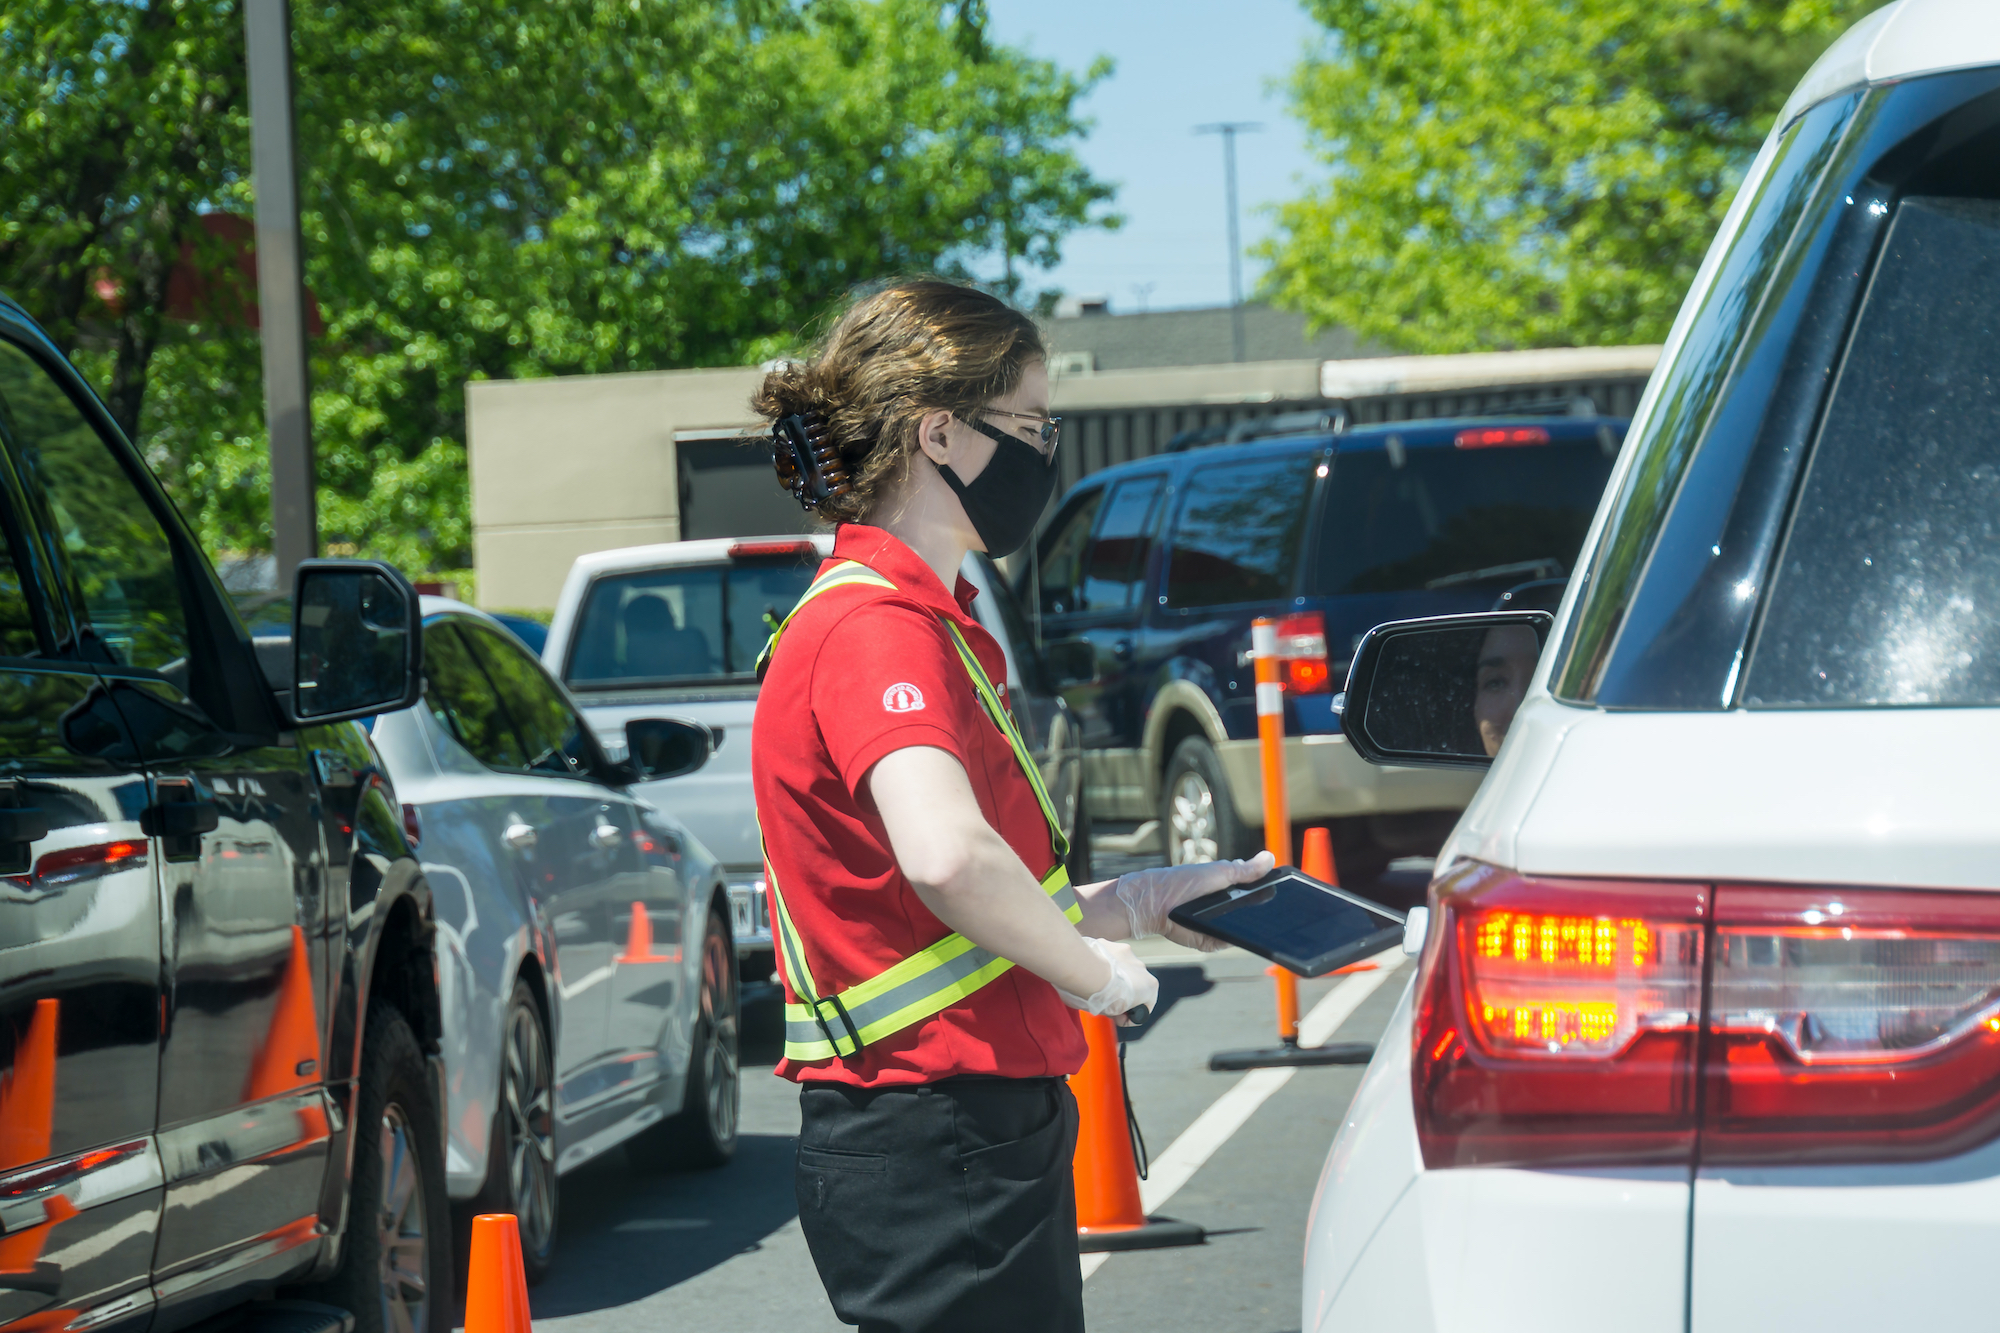 Young youthful fast food worker working at Chick-fil-a drive through amidst cars take orders with tablet.